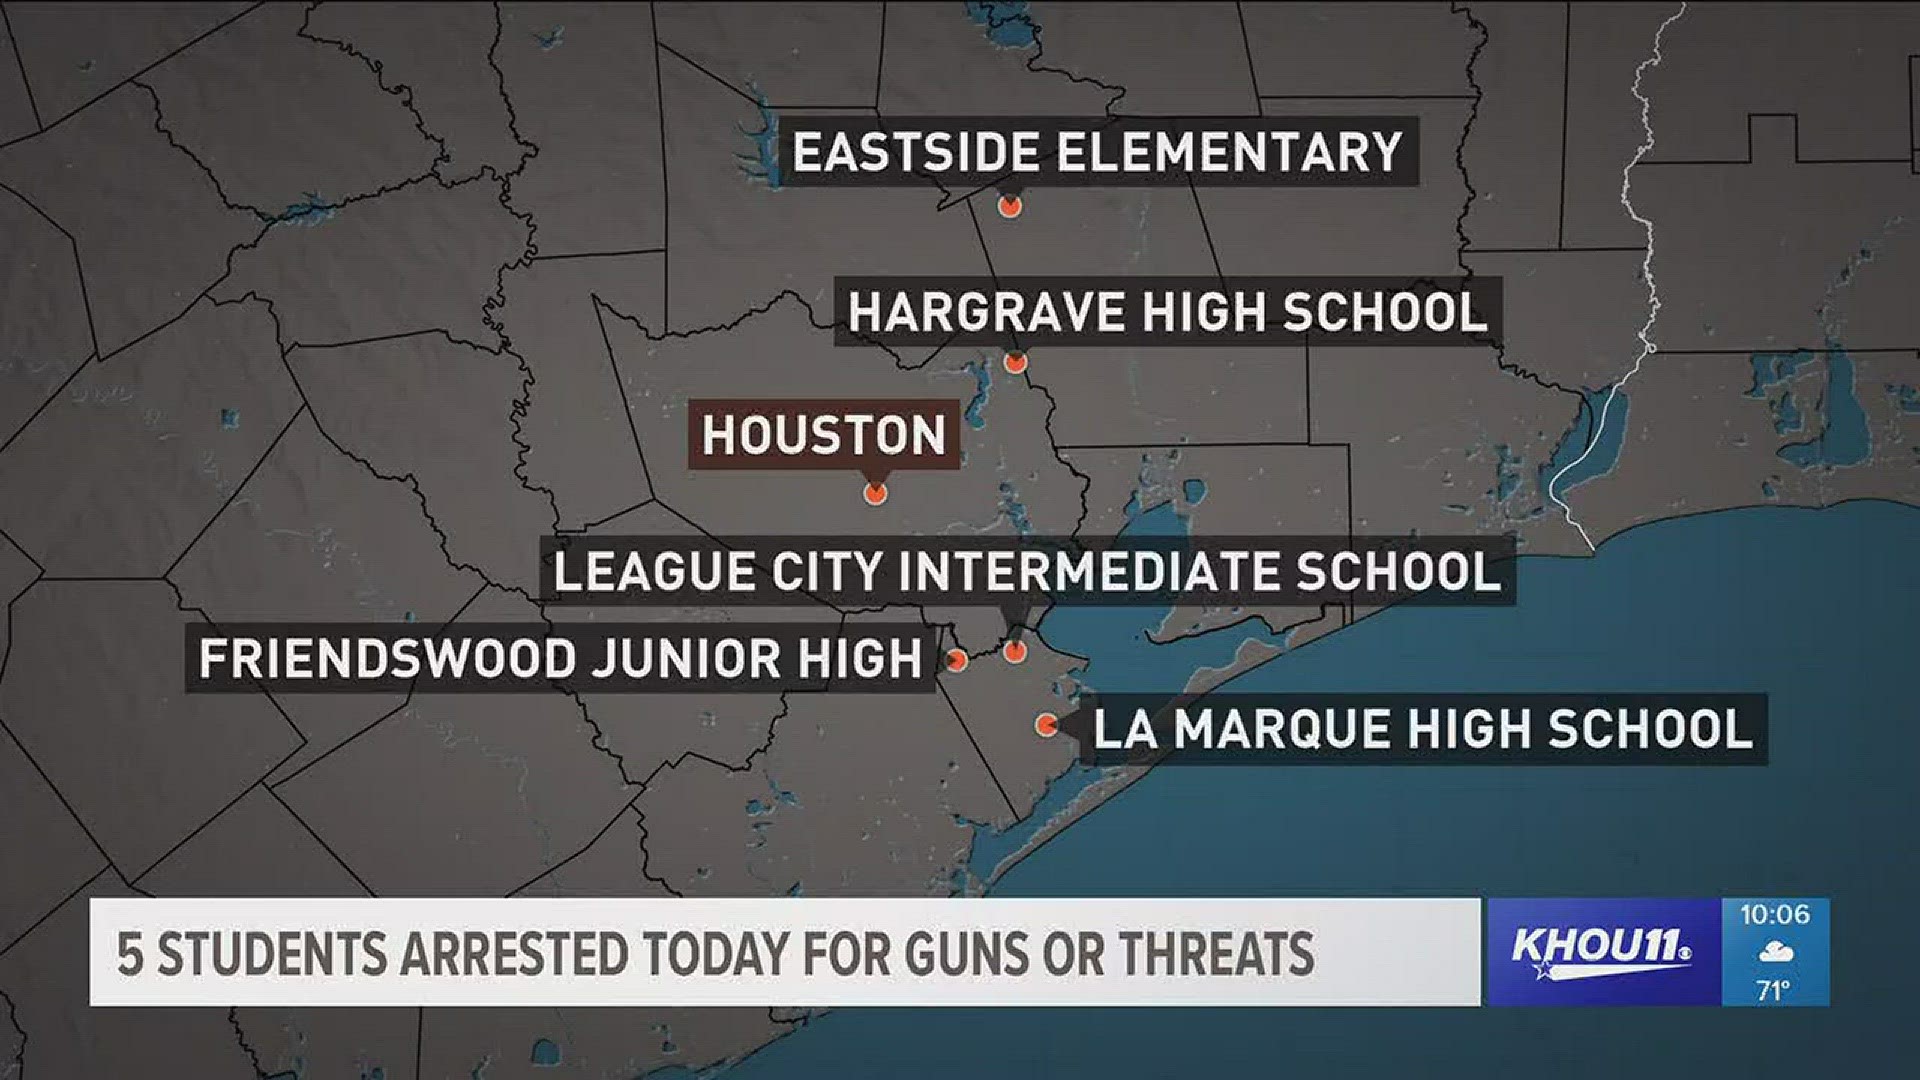 KHOU 11 Top Headlines at 10 p.m. include a Santa Fe shooting survivor credits a victim with saving her life, the Santa Fe ISD officer who was shot during the school shooting is still in critical condition and five students were arrested for guns or threat